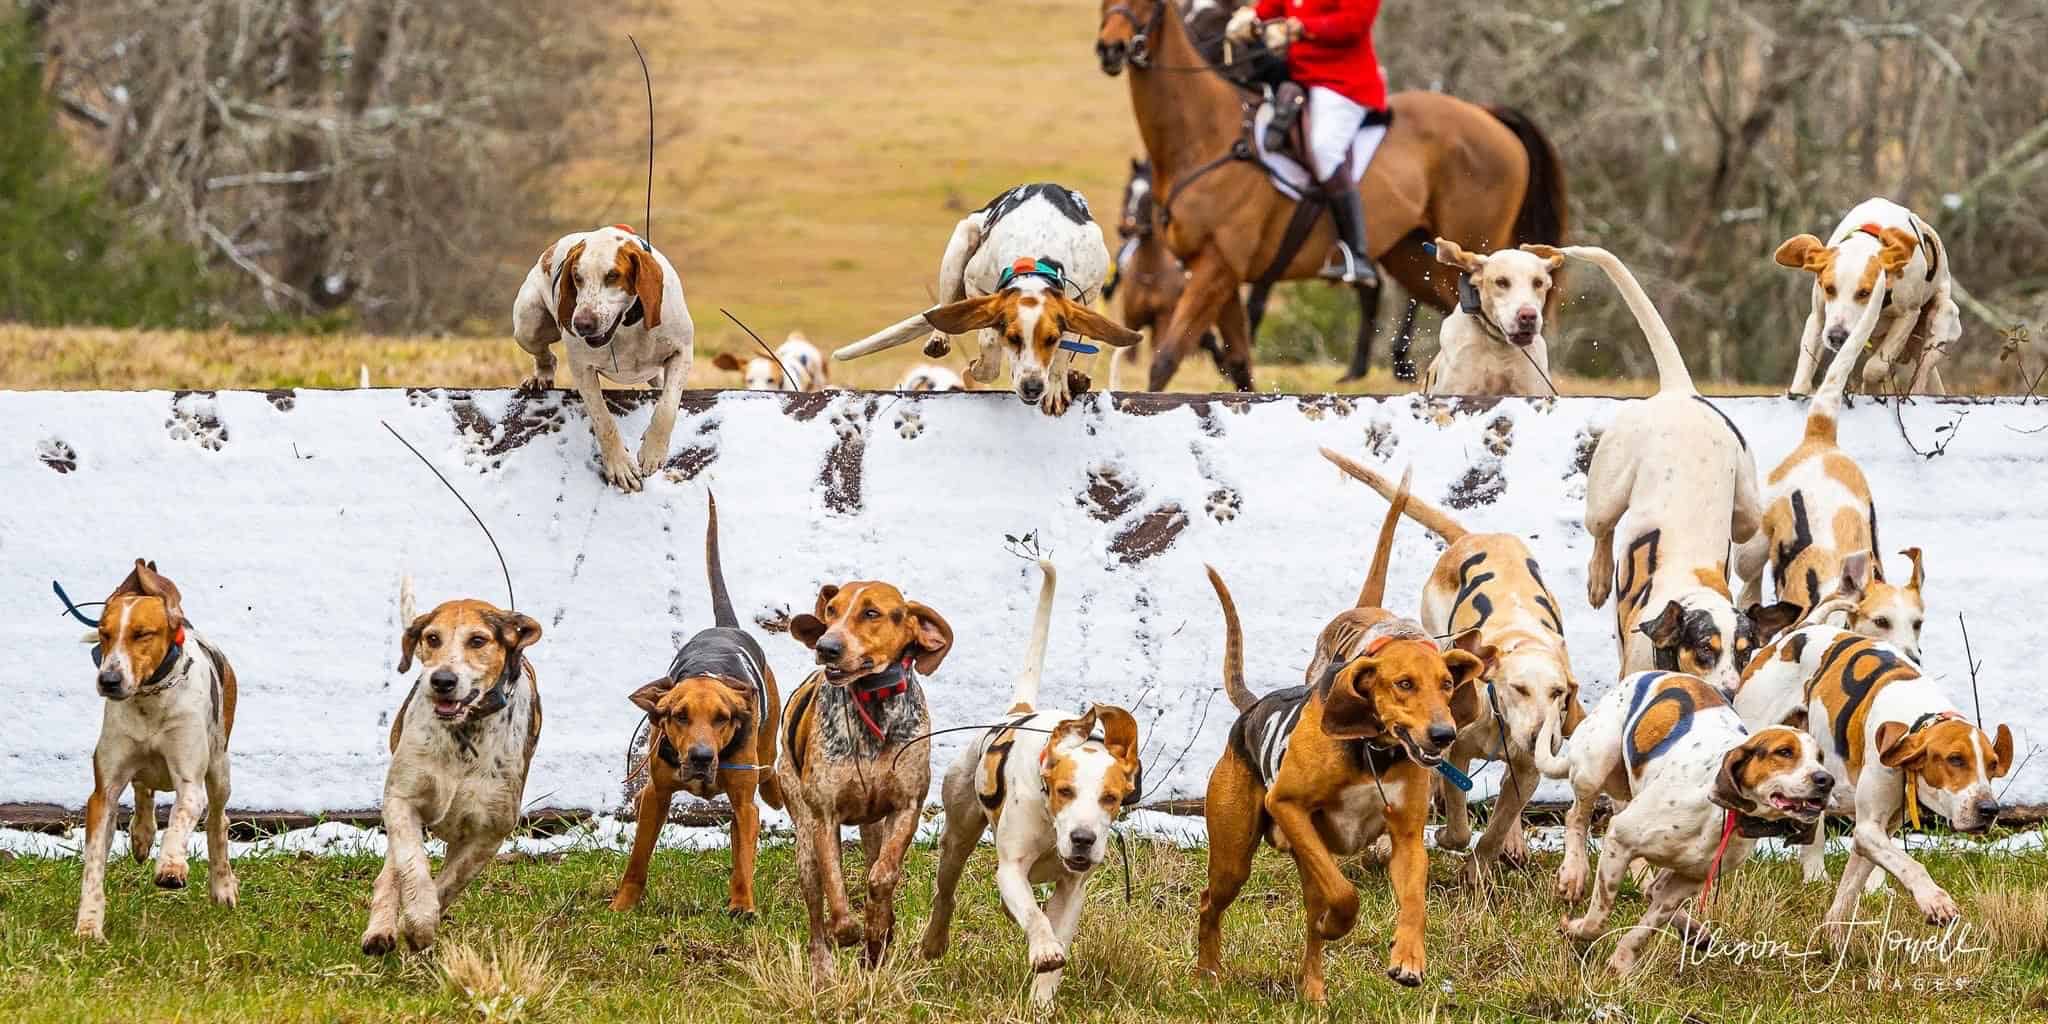 belle meade hunt foxhunting fox hunt georgia foxhound performance trial